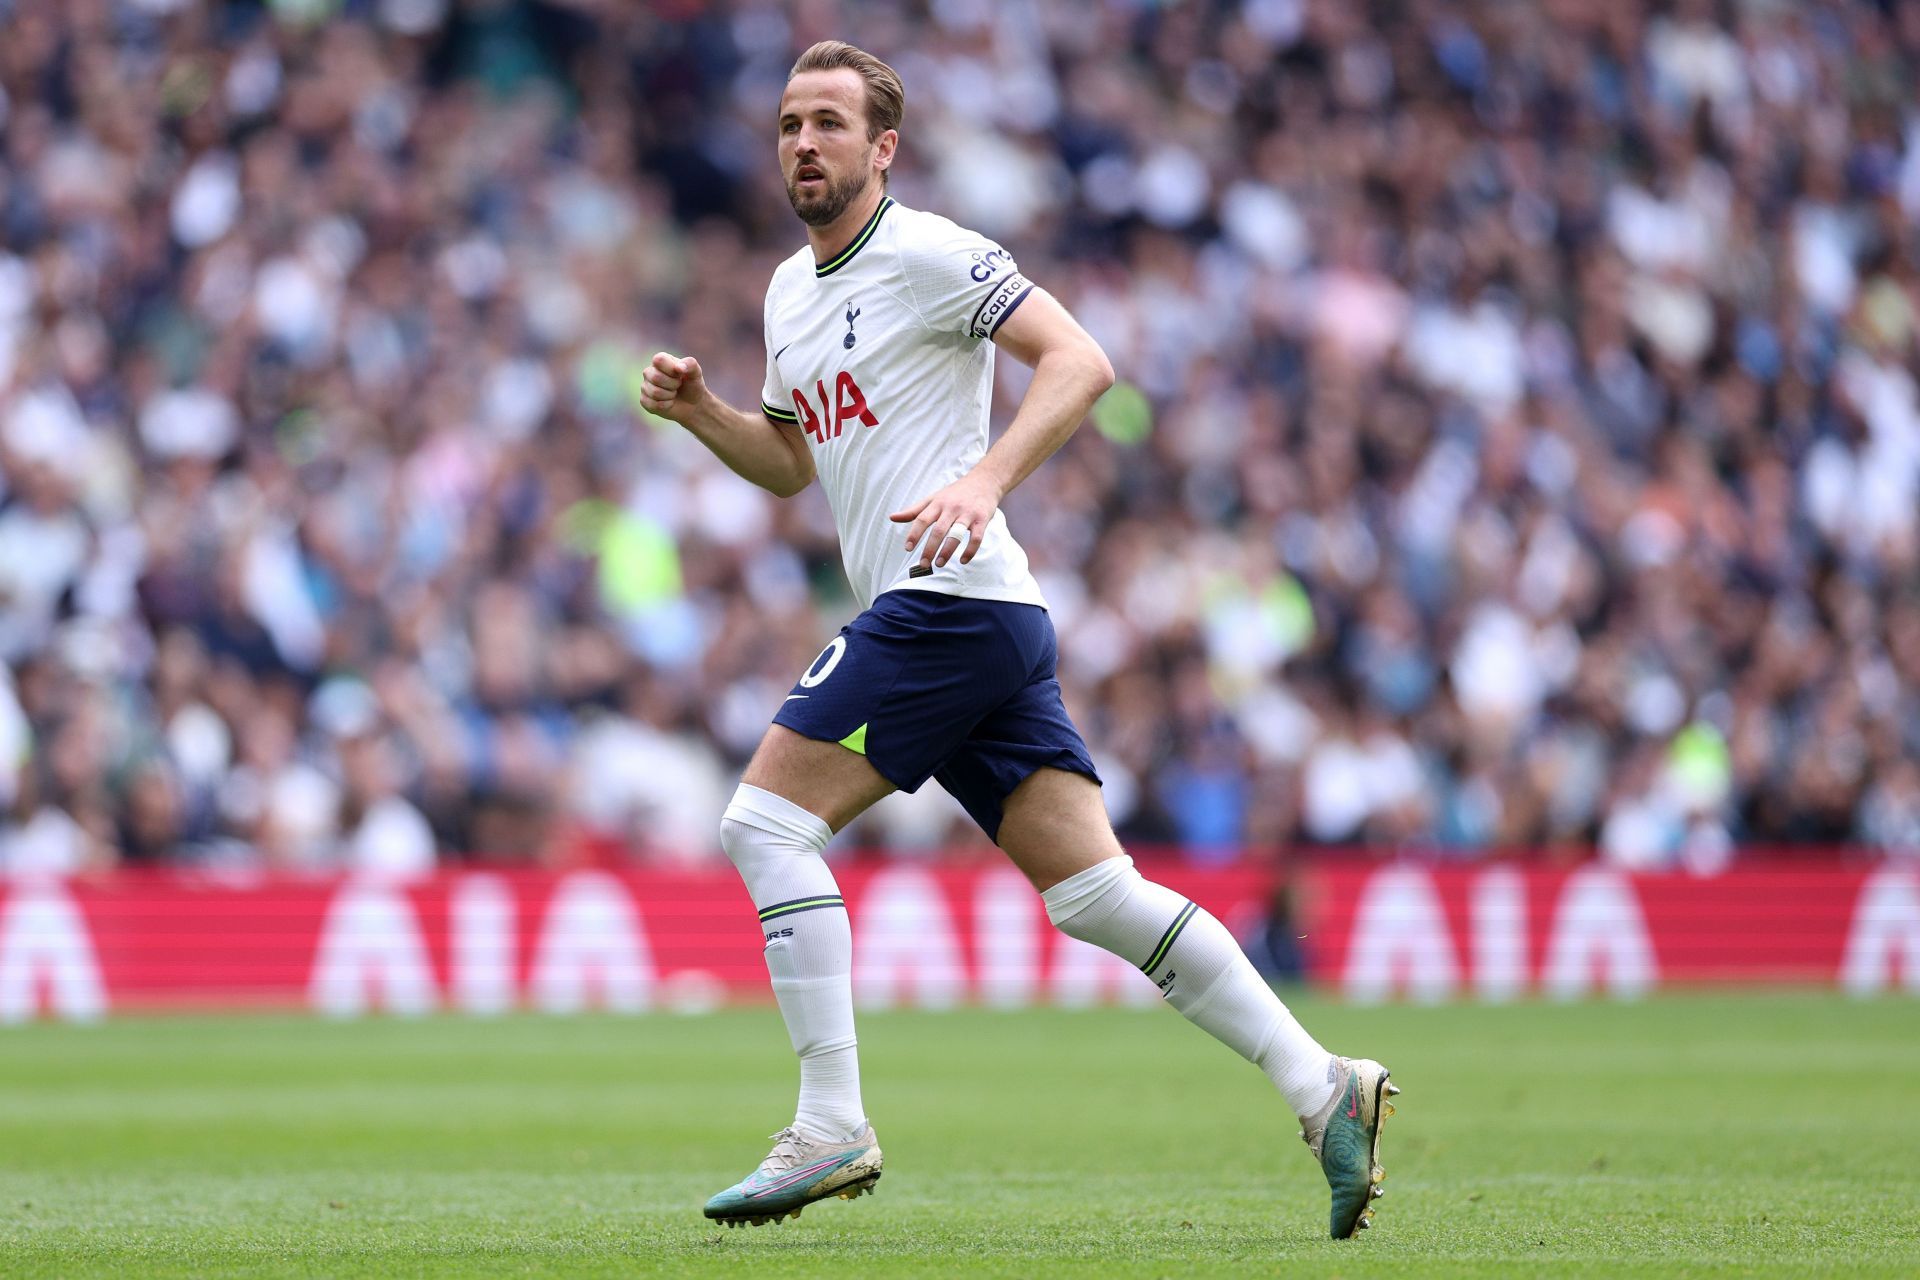 Man Utd could use Kane to boost their commercial outlay